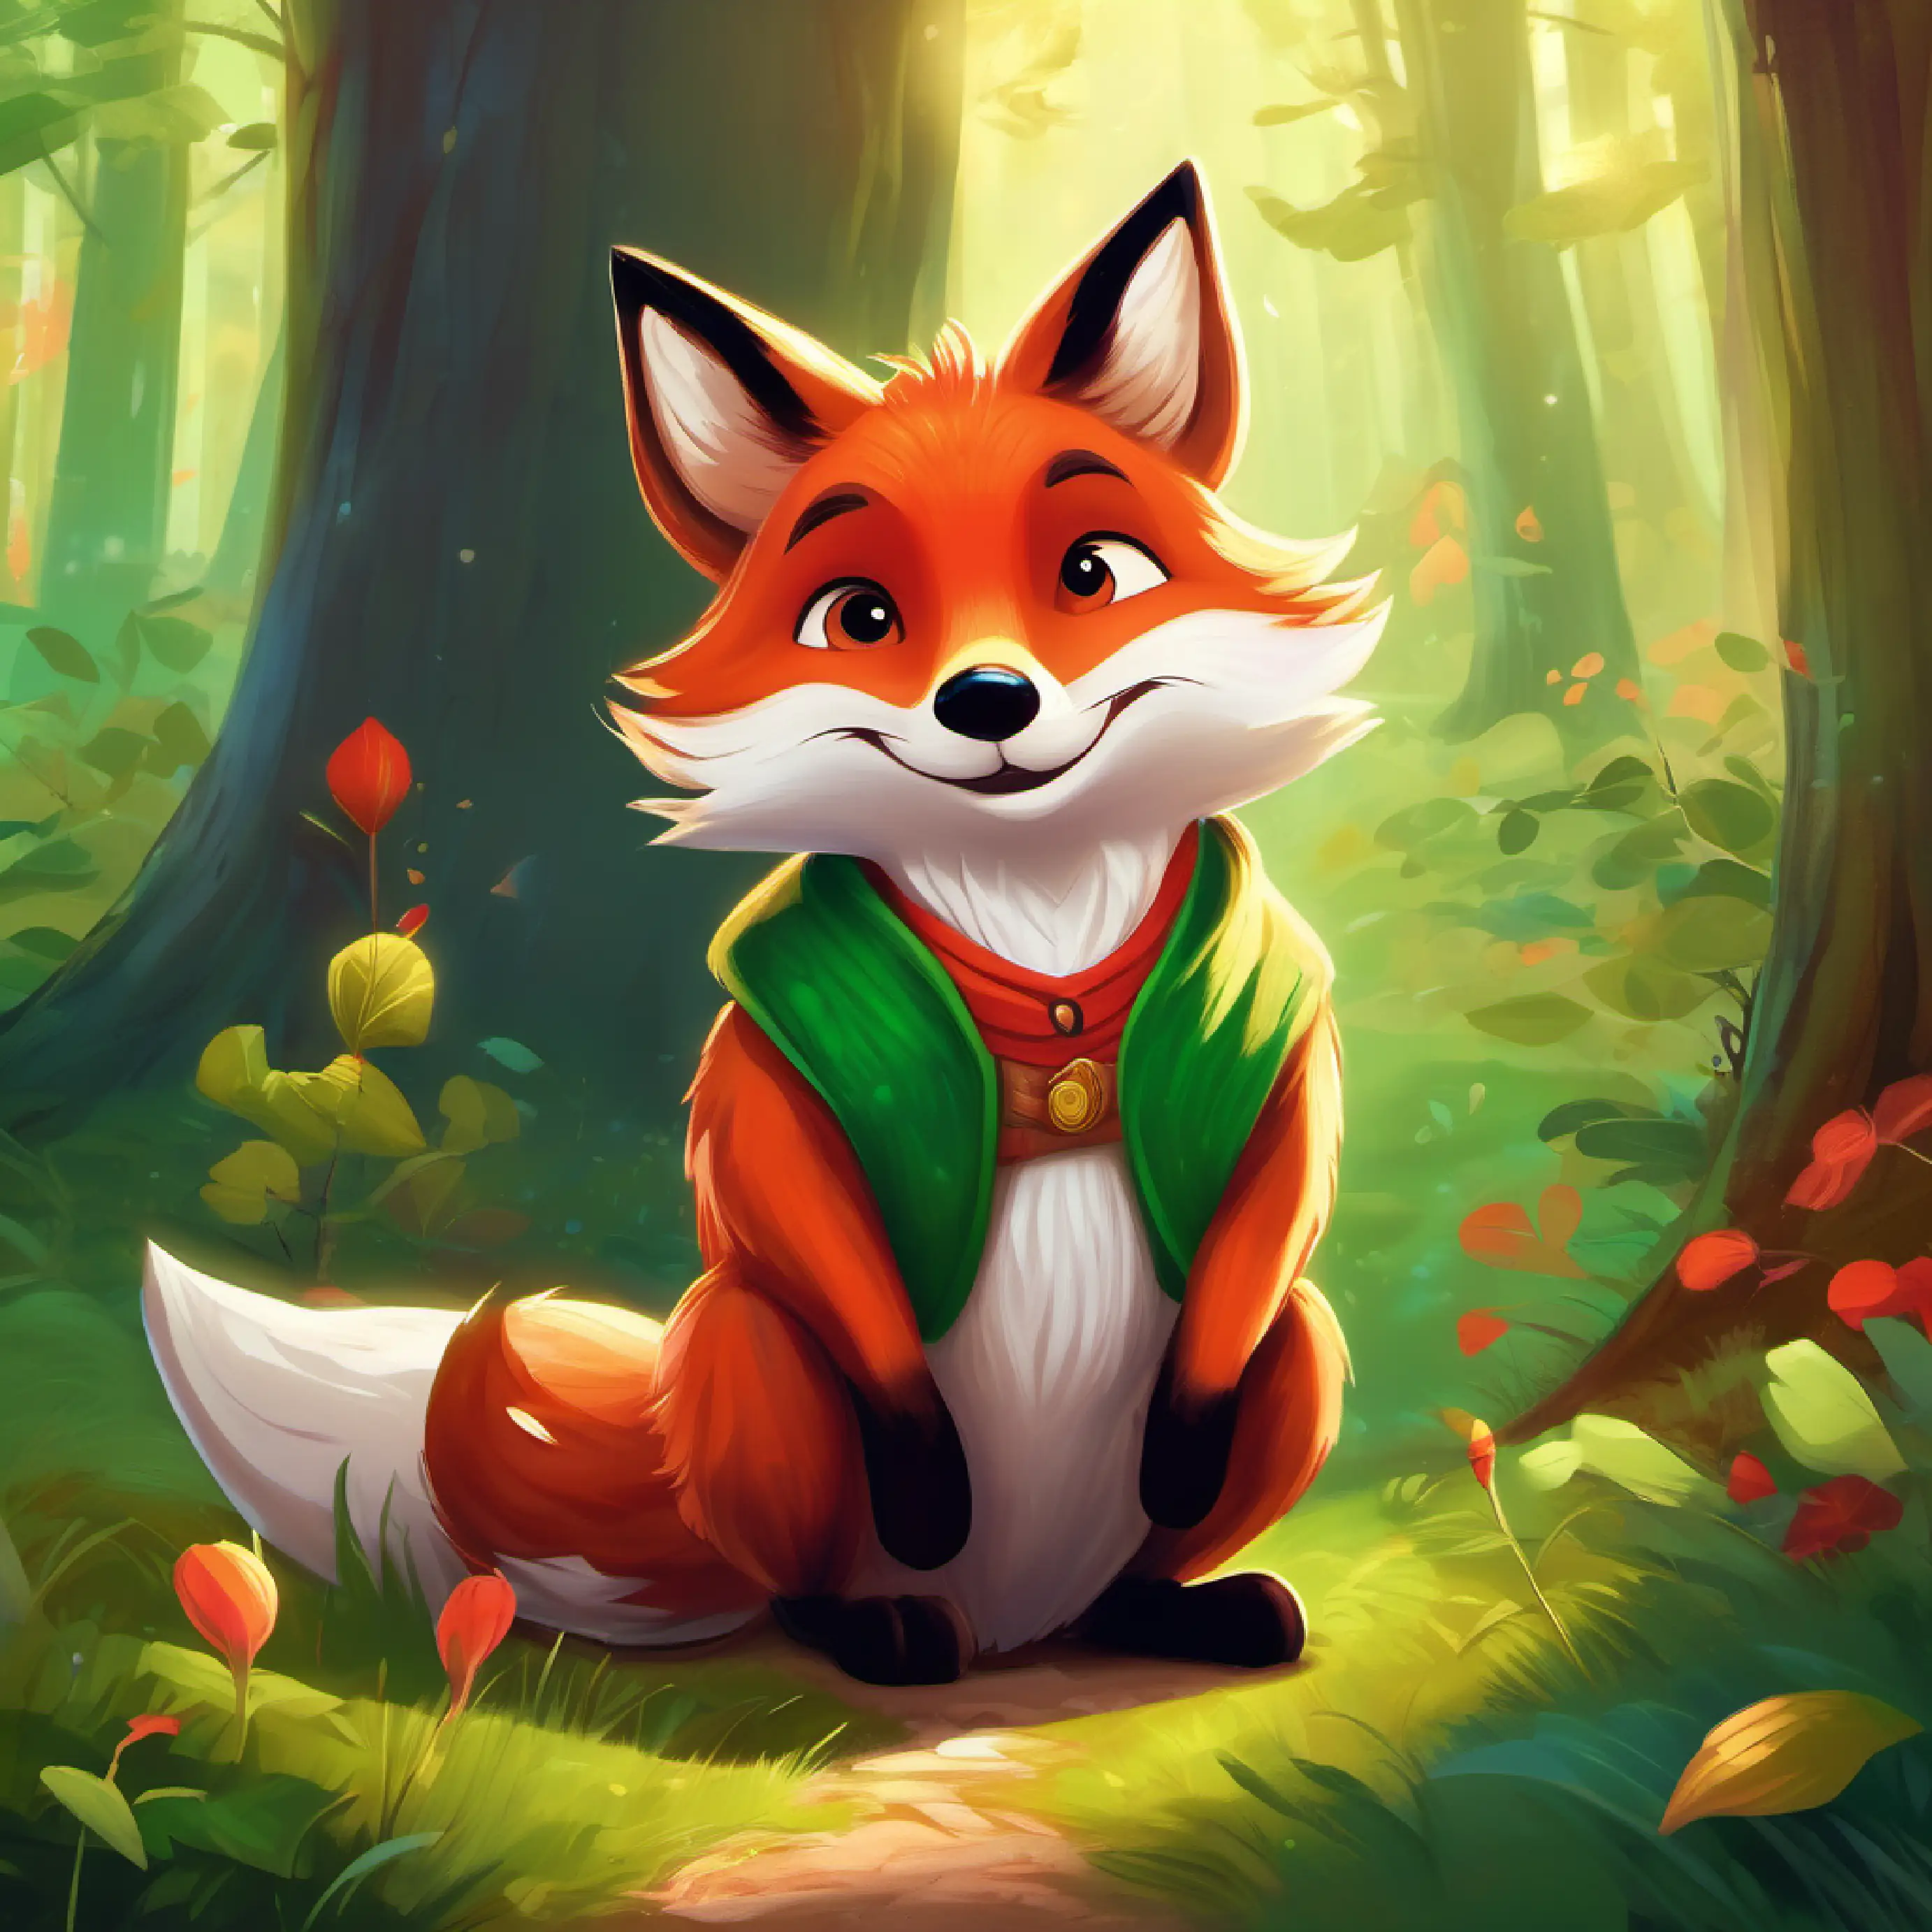 Introduction to the magical forest, main character Red fur, bright green eyes, playful and brave young fox, and the quest for the Golden Acorn, setting the scene.